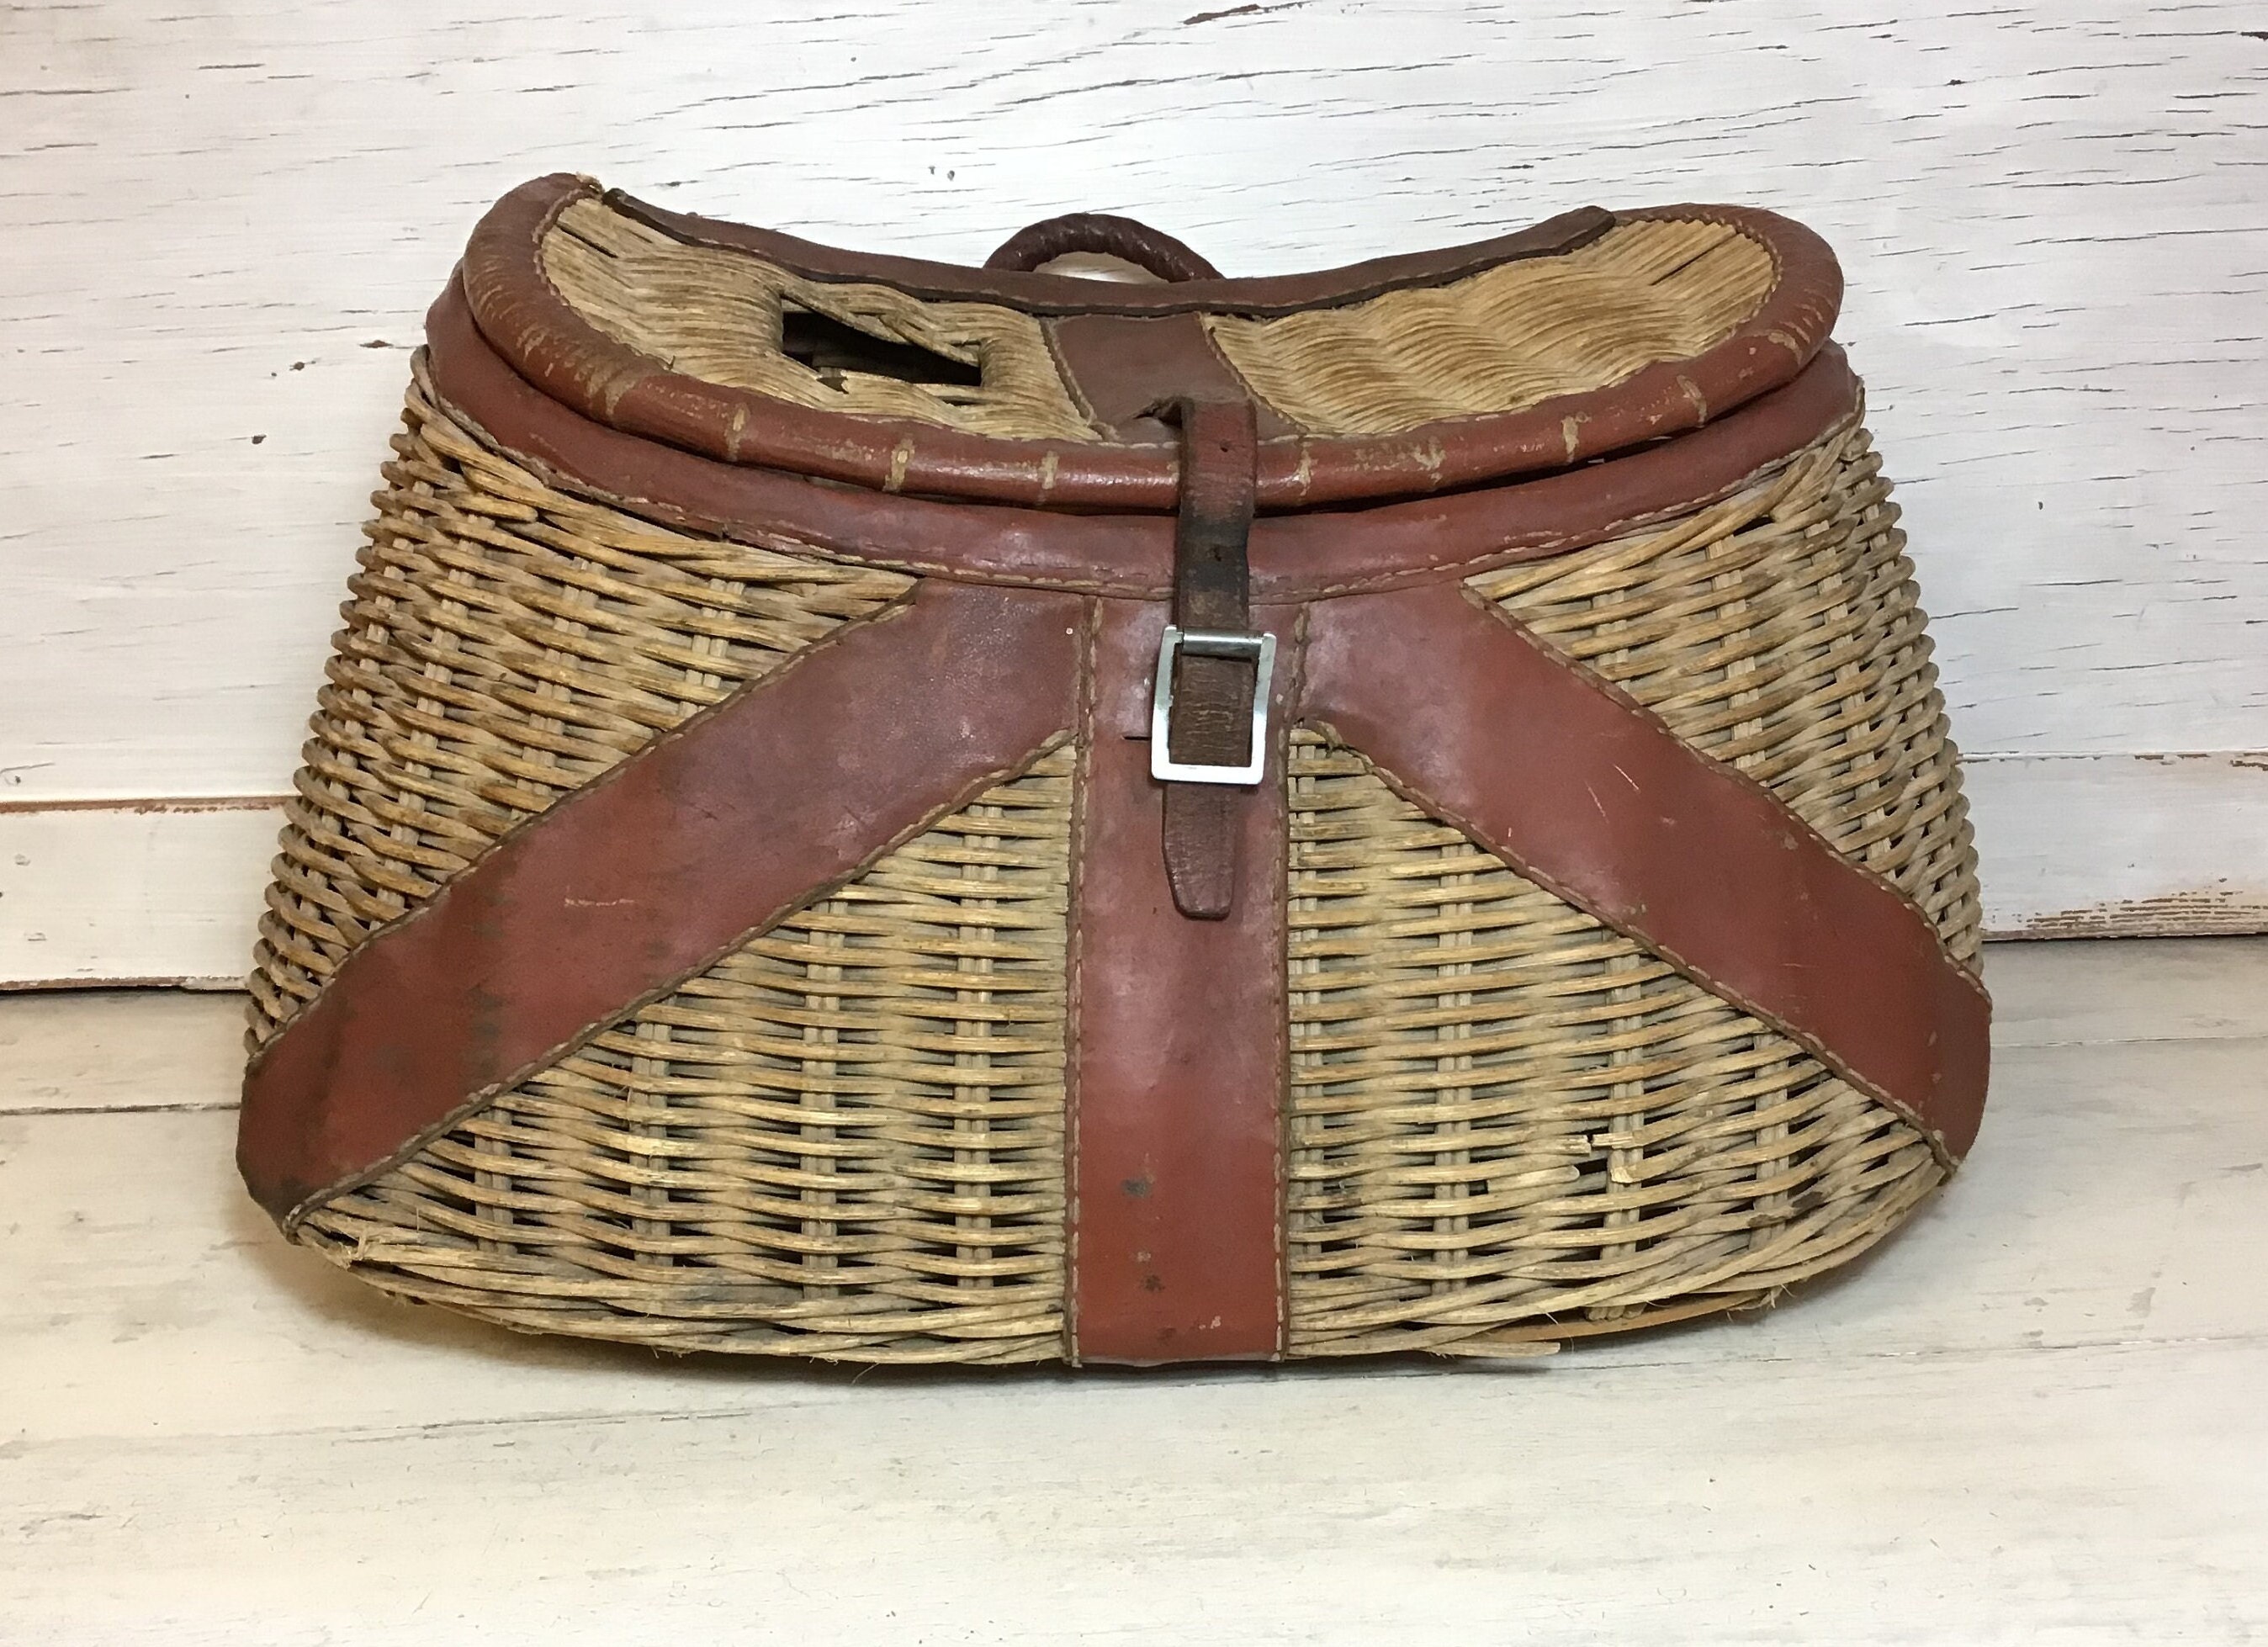 Large Vintage Fishing Creel - Wicker and Leather Basket